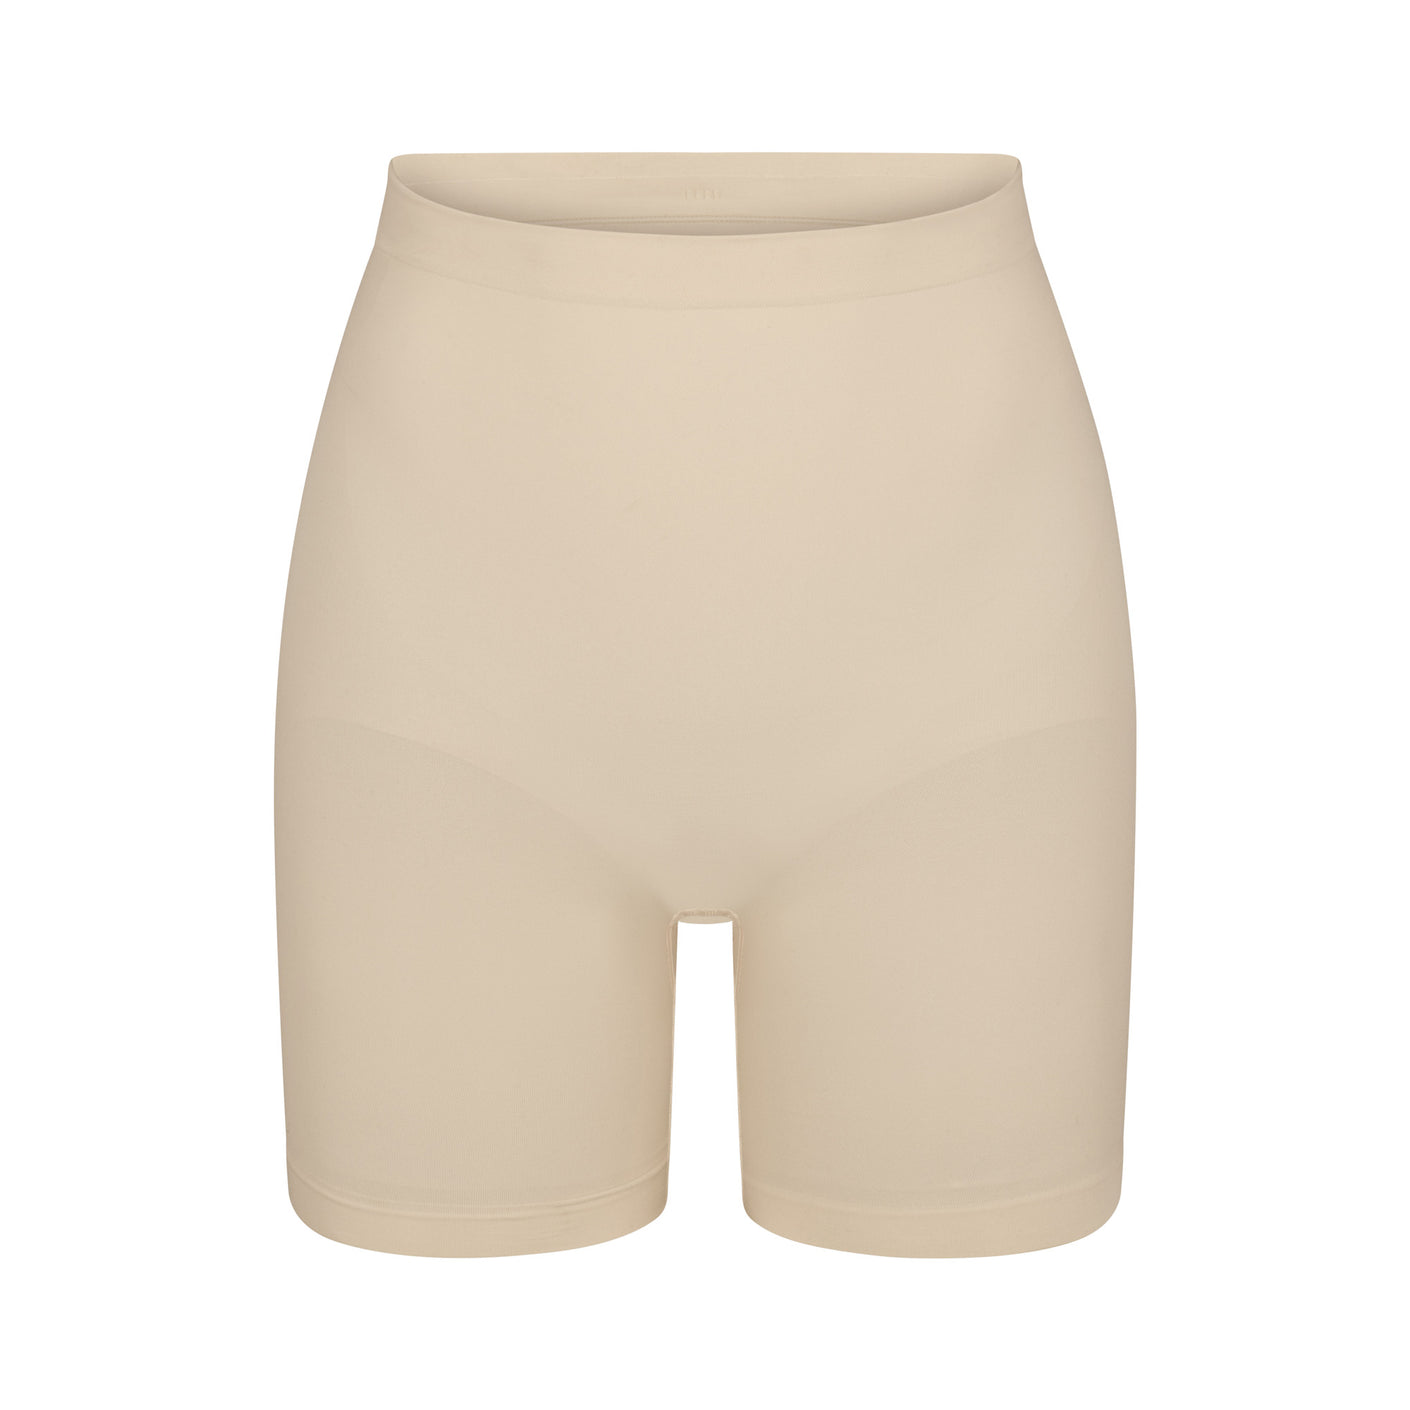 Compression Shaping Shorts - XL/2X - Beige, Gift Cards